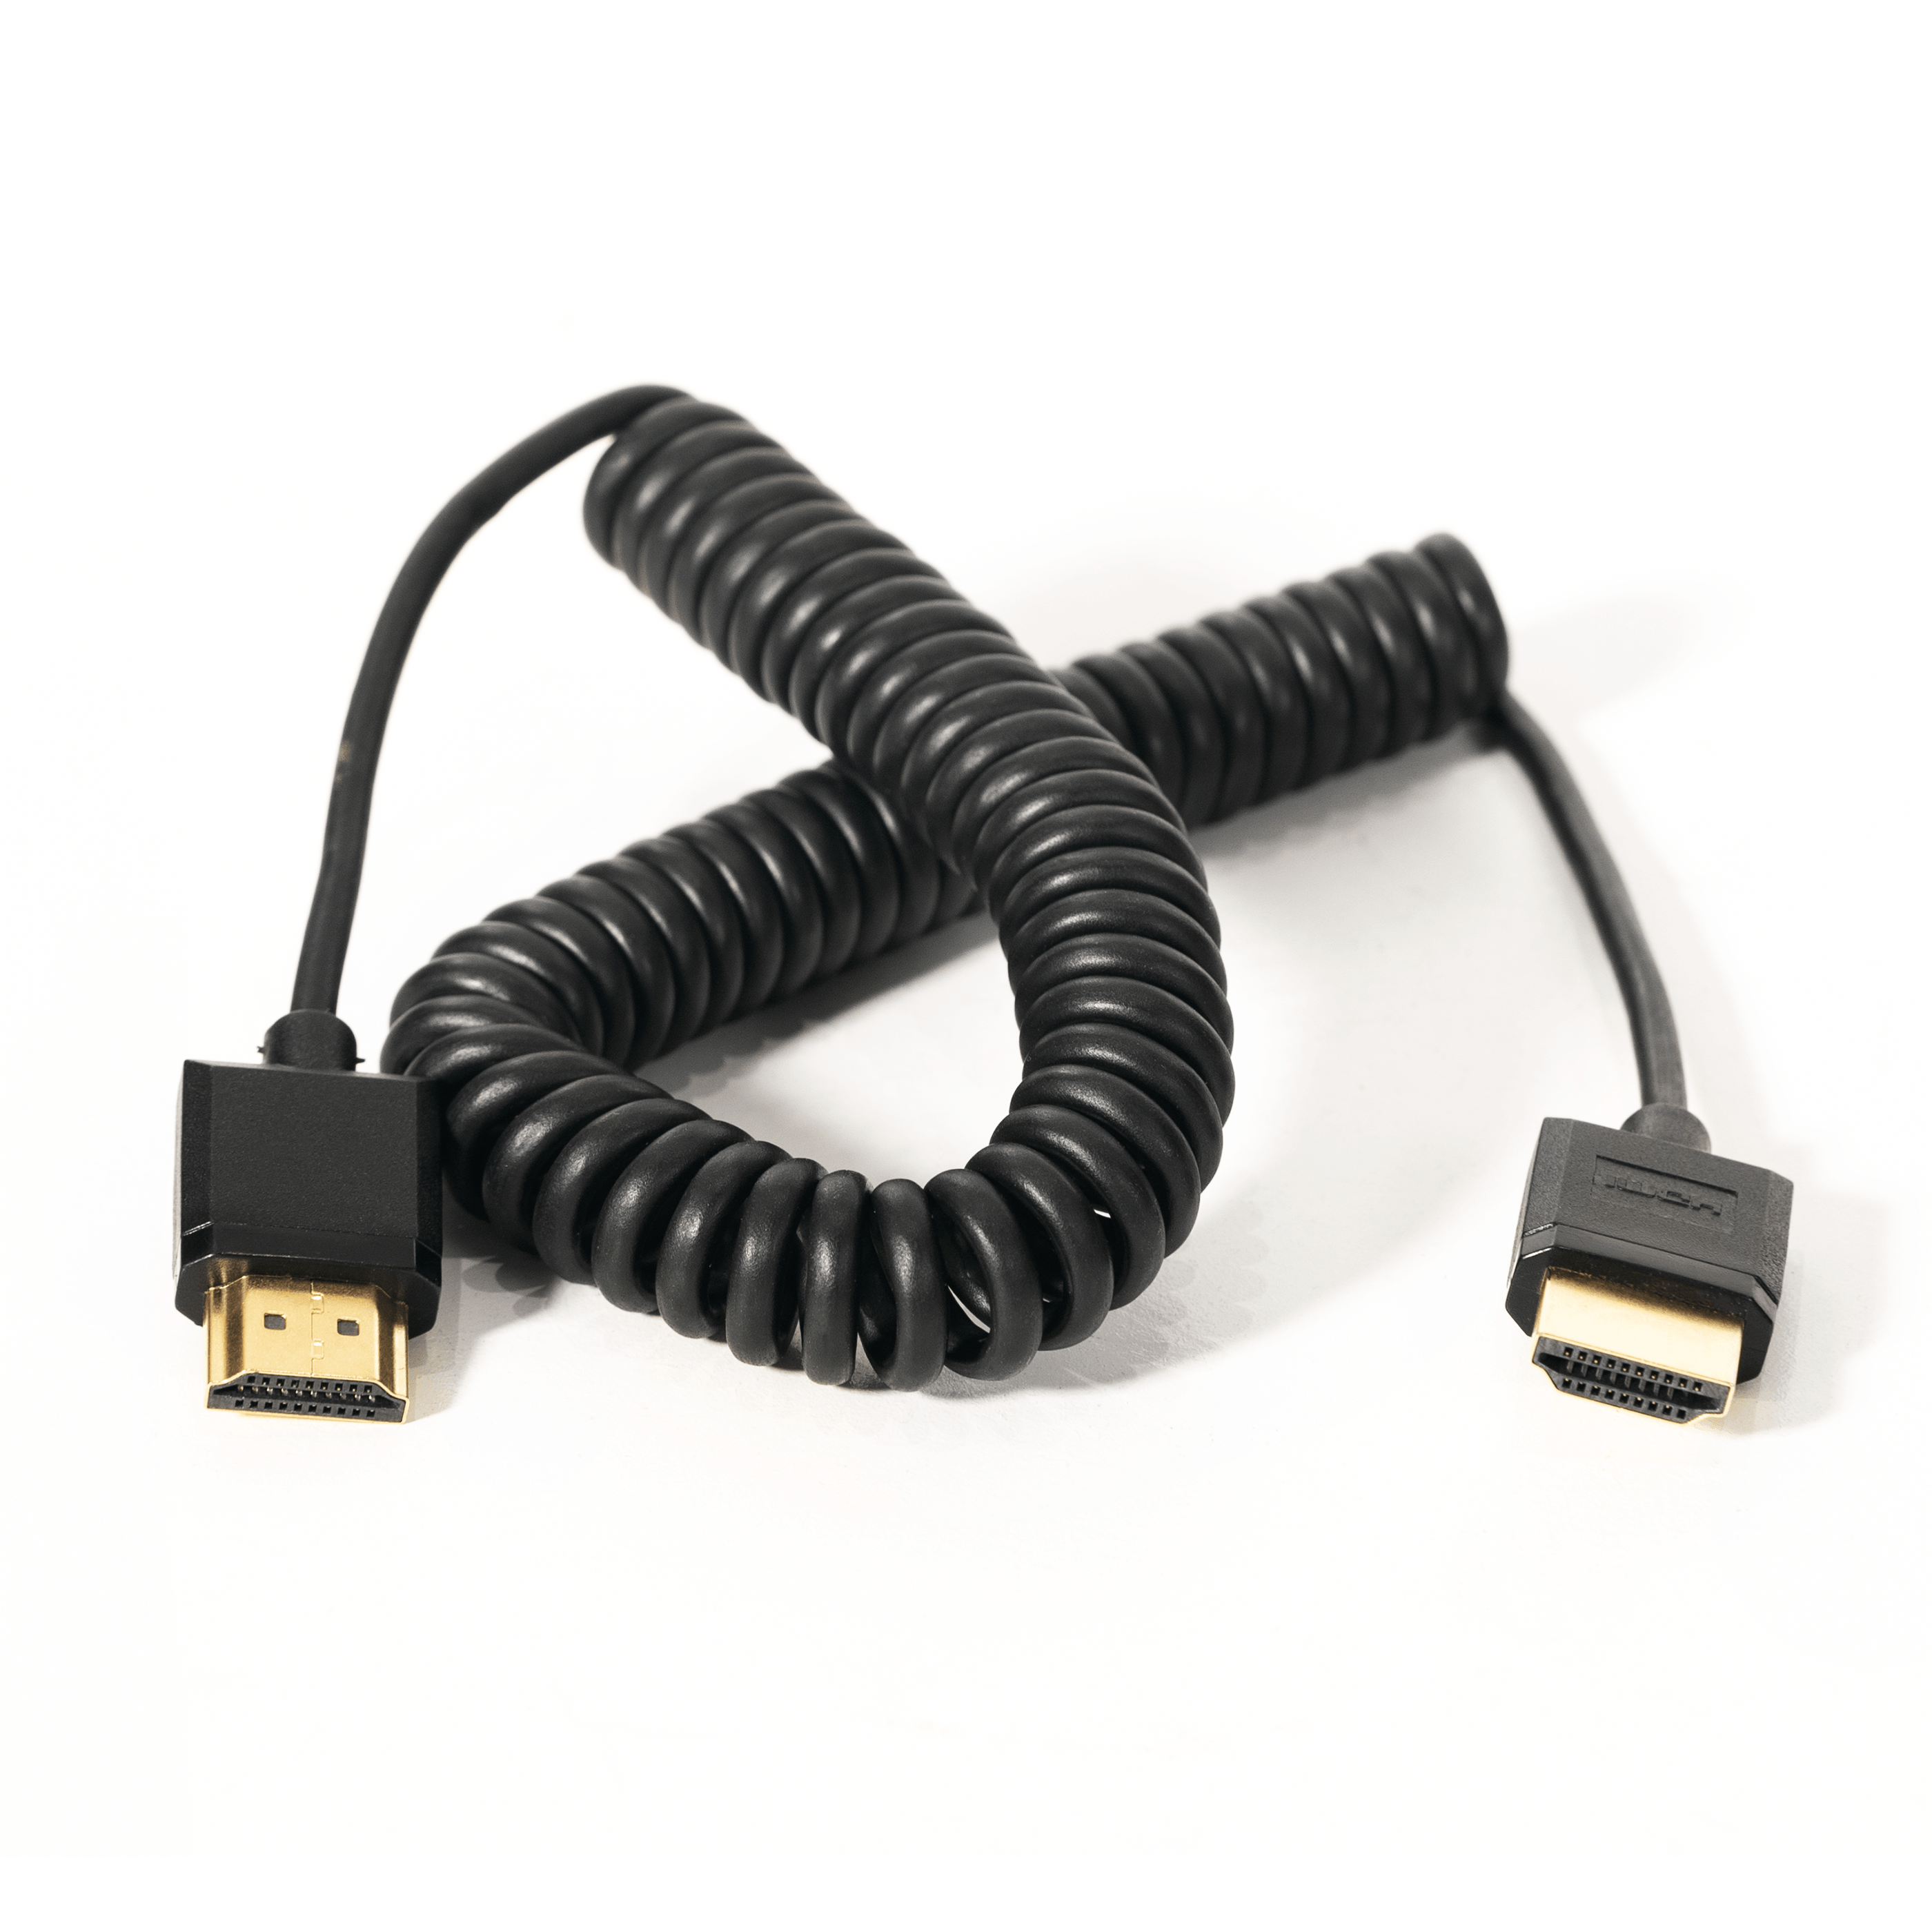 16 in - 8 ft Coiled Full-size HDMI Cable - 4K Standard HDMI (Type A) Full to Full